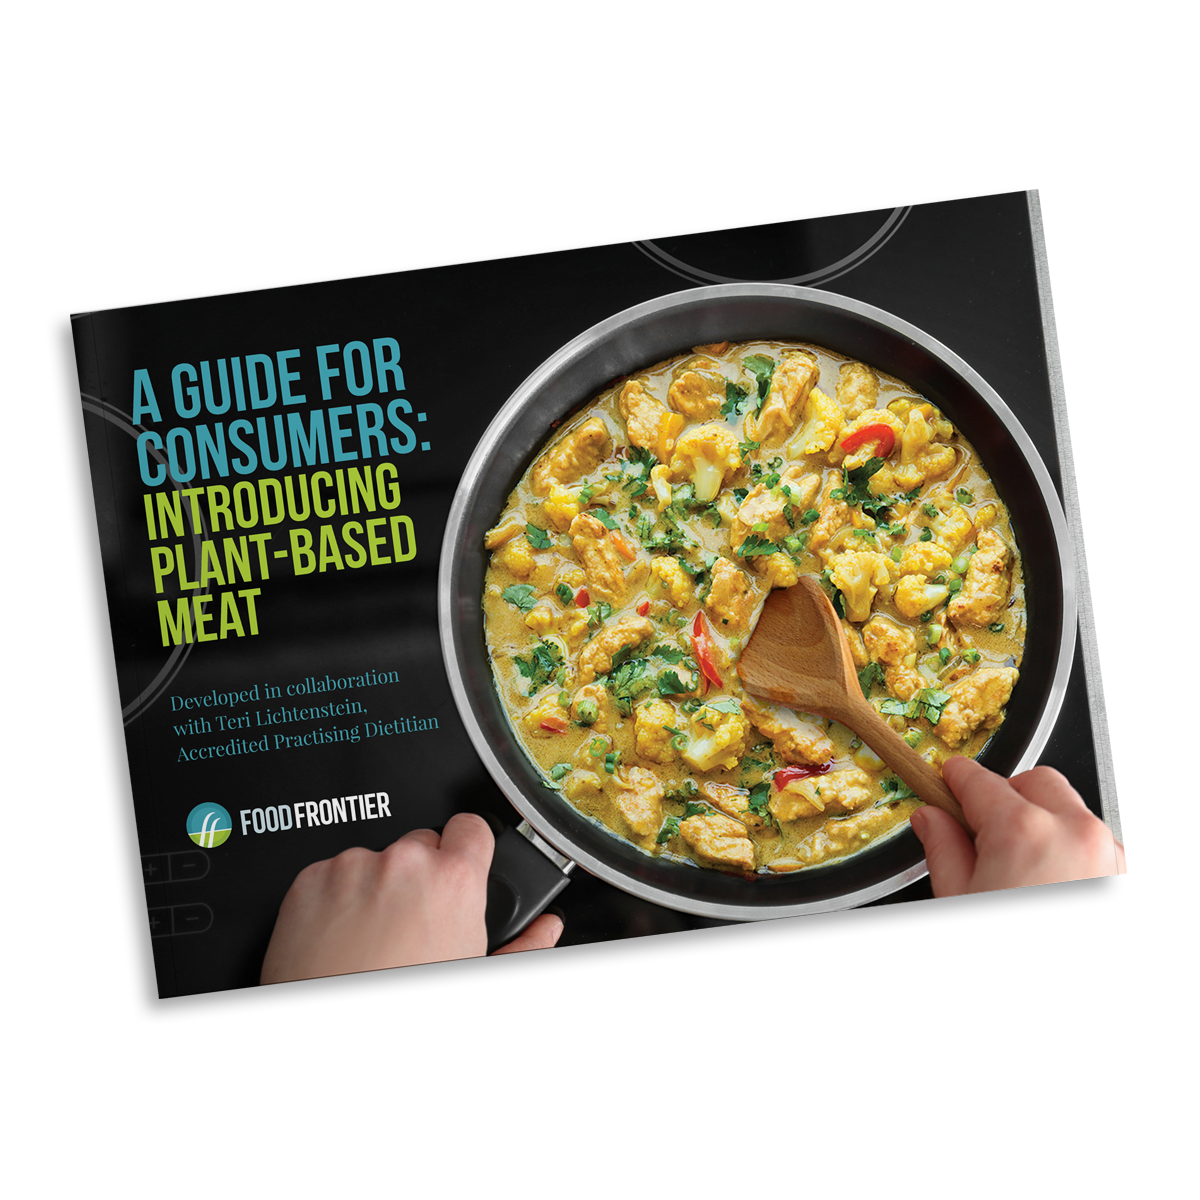 Guidance for consumers on plant-based meat, plus – recipes!